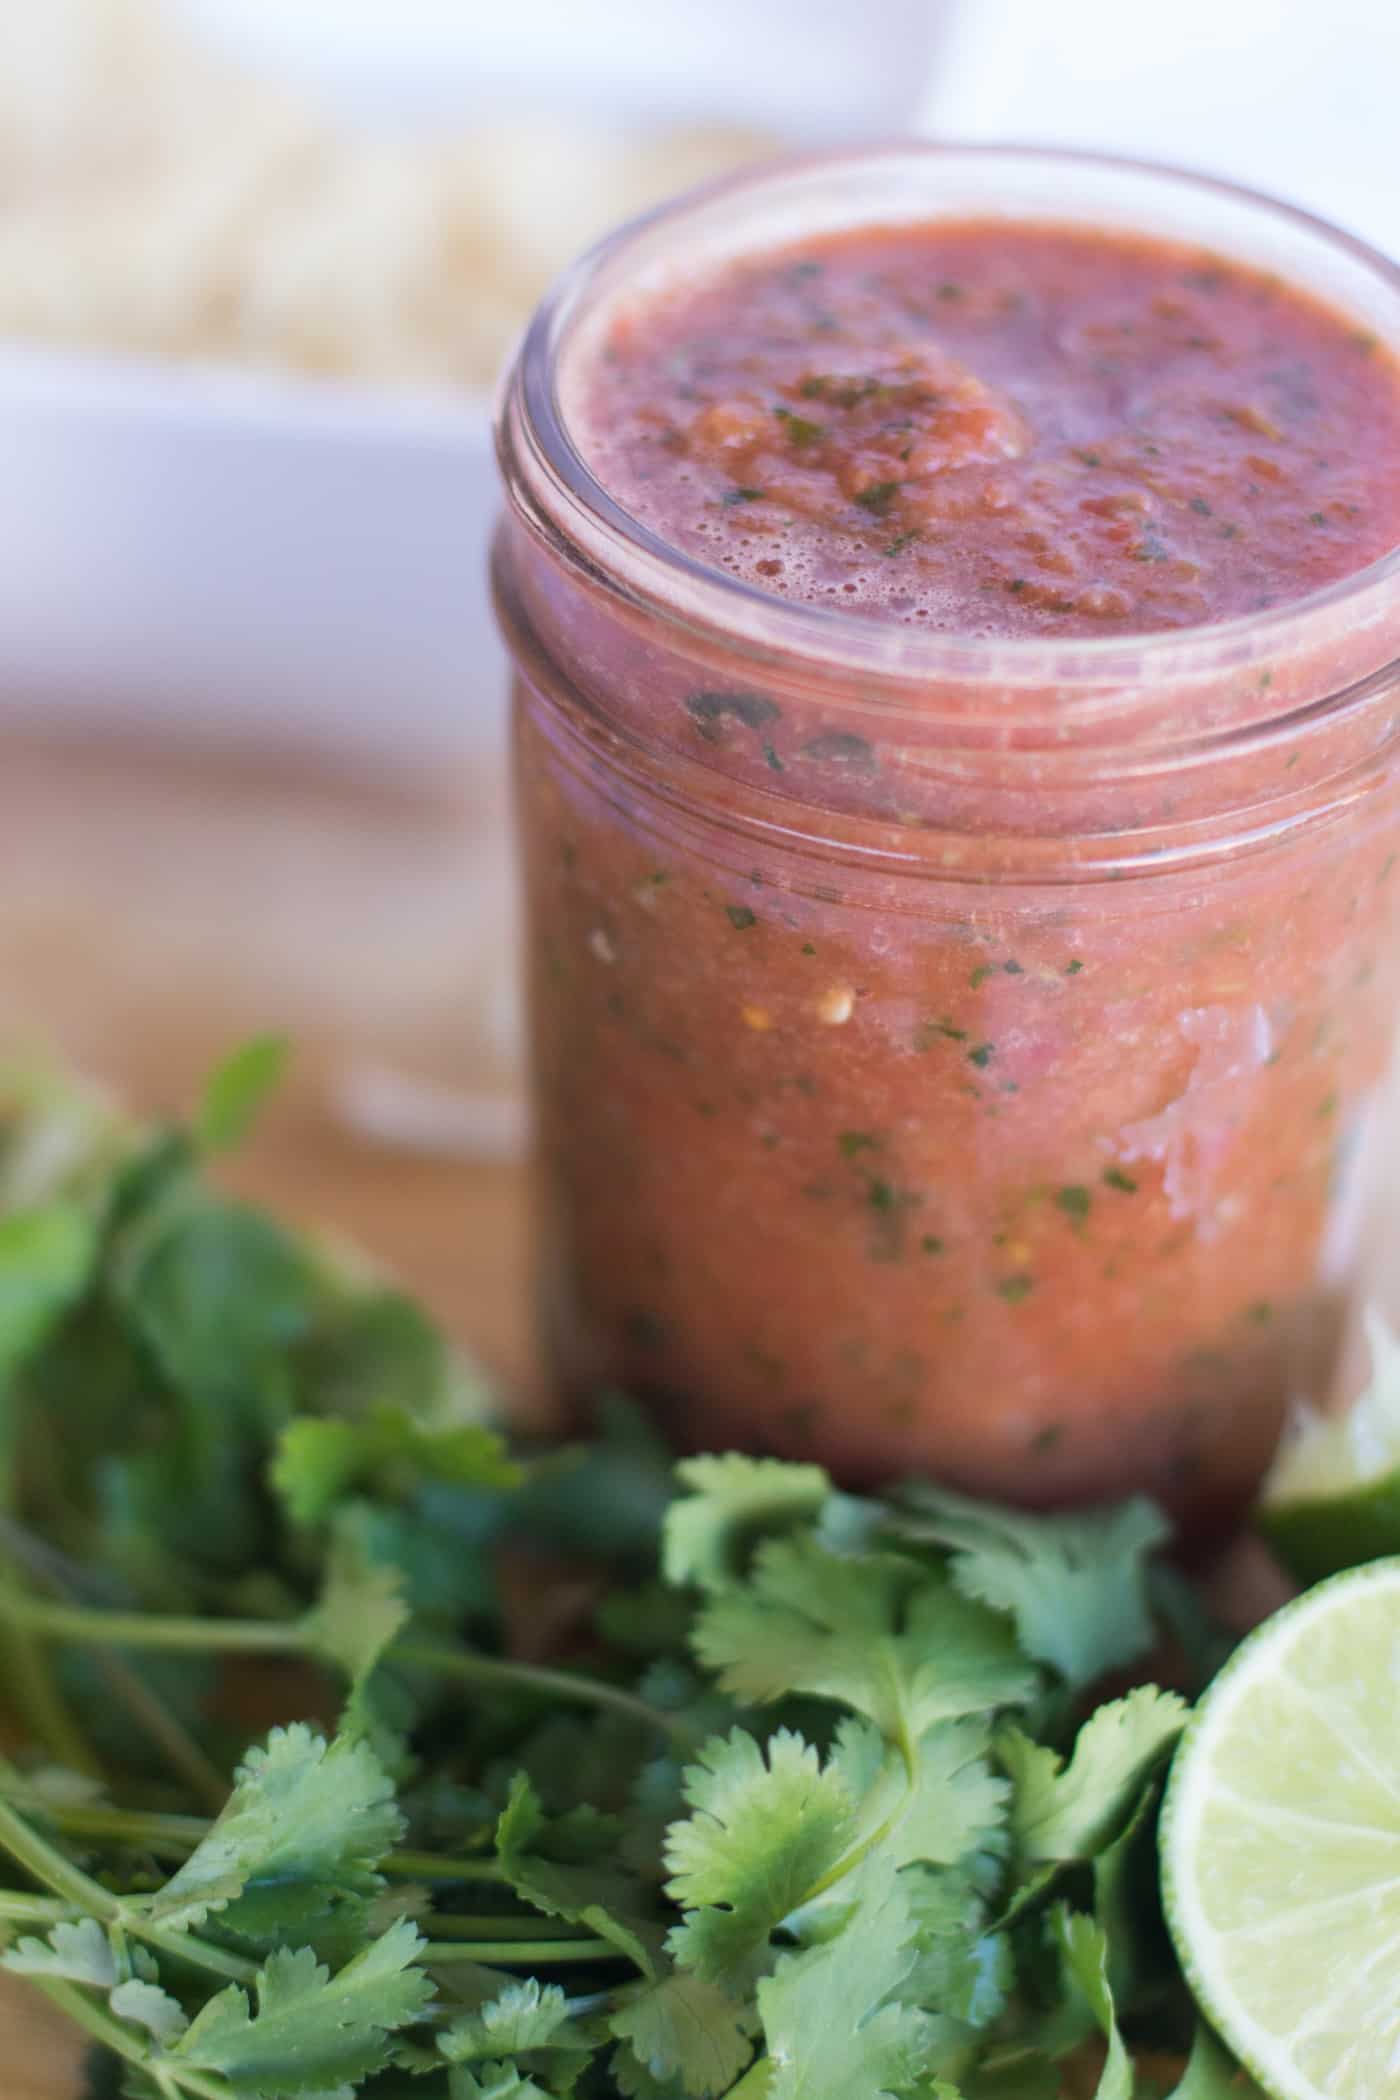 Who doesn't love chips and salsa? This tomato salsa recipe is absolutely delicious and SO easy to make in the blender. It will be a family favorite!